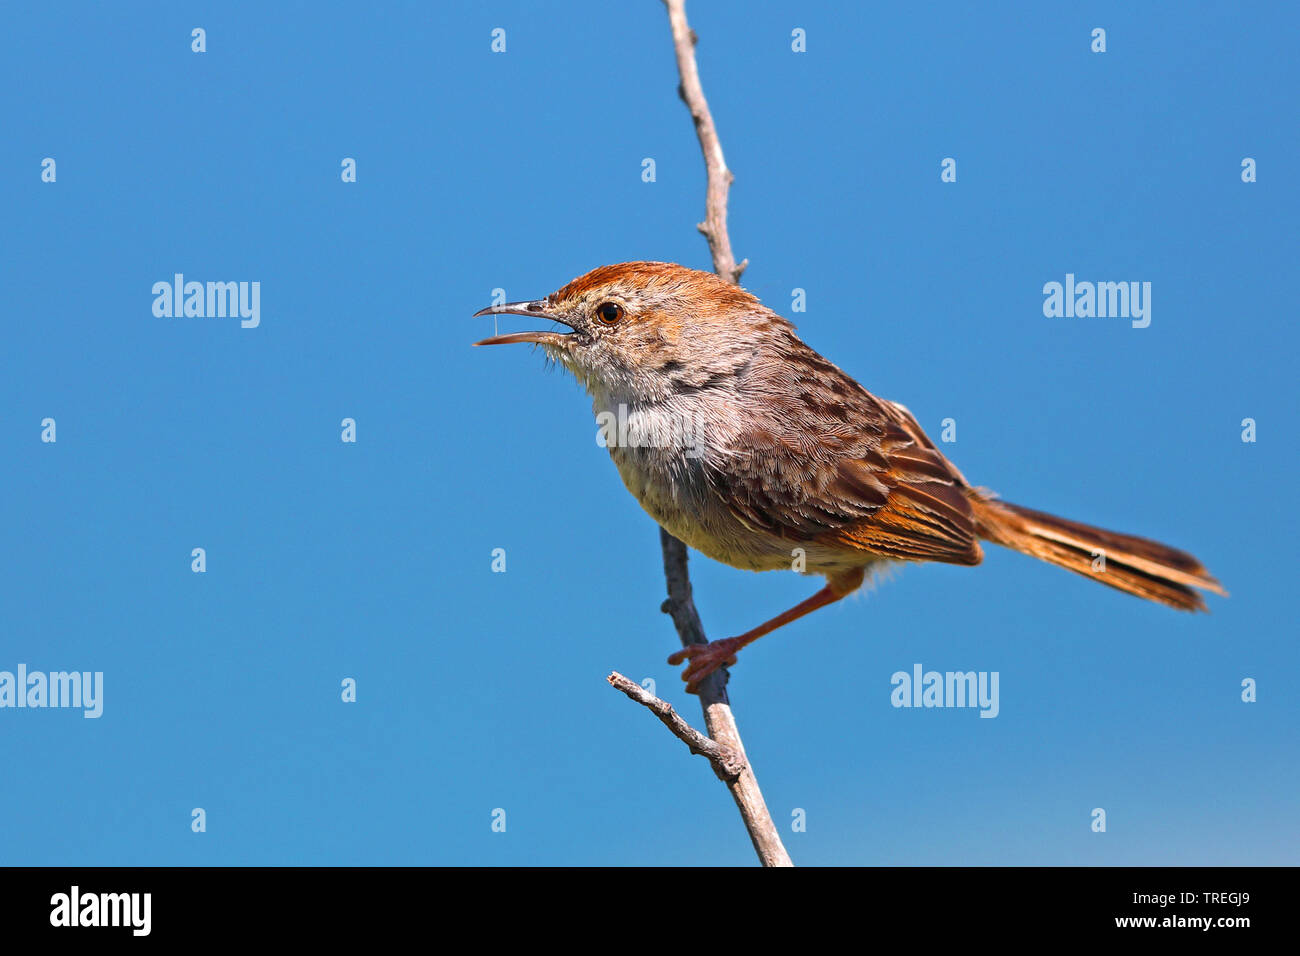 red-headed cisticola, grey-backed cisticola (Cisticola subruficapilla), sitting on a branch, calling, South Africa, Western Cape, Cape of Good Hope National Park Stock Photo